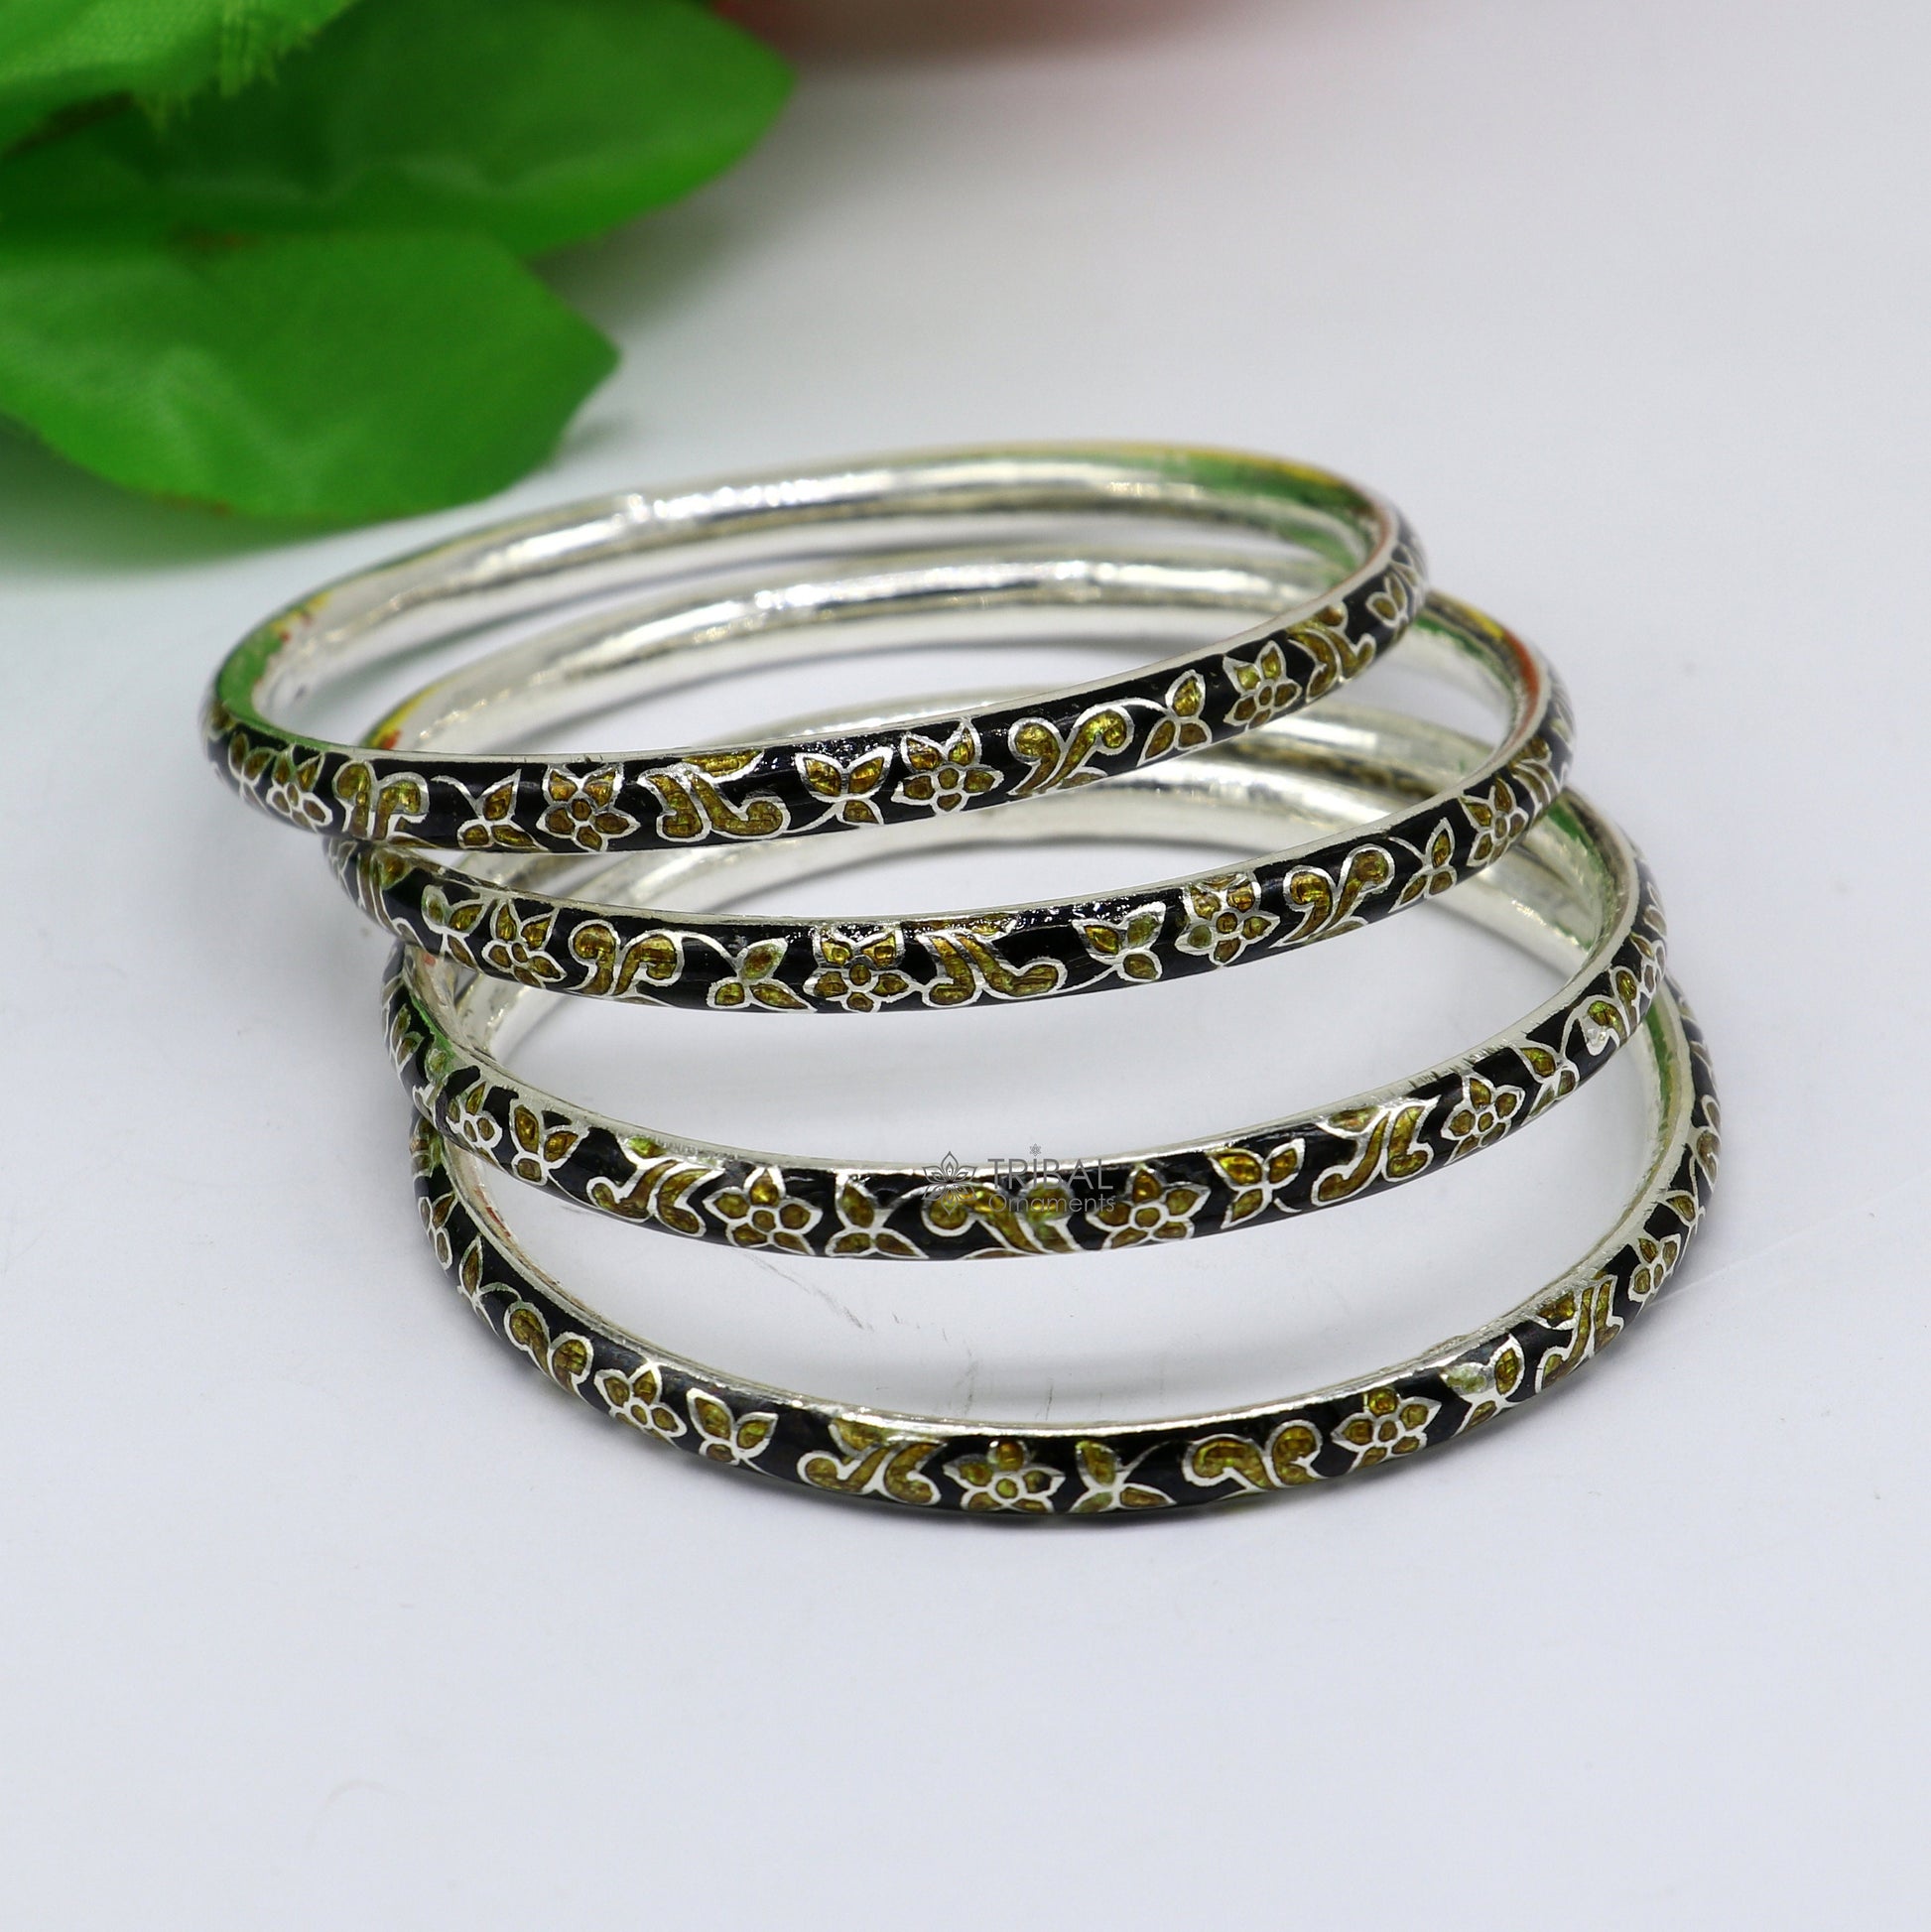 925 Sterling silver Traditional cultural design meenakari (color enamel )bangles bracelet brides trendy style jewelry from india nbA370 - TRIBAL ORNAMENTS